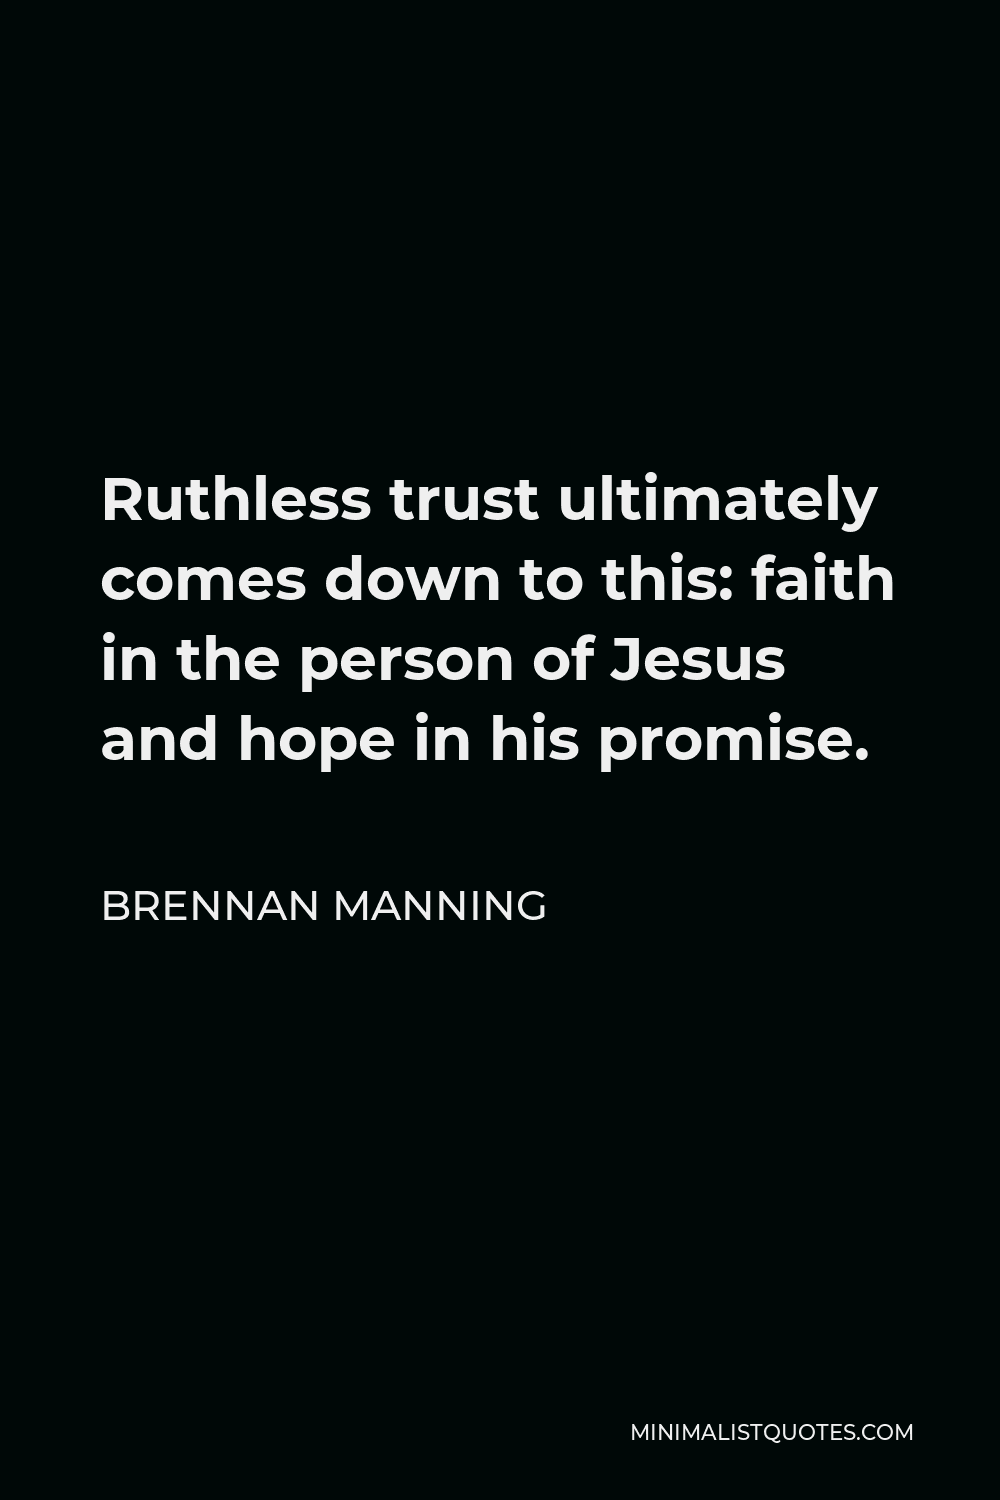 Brennan Manning Quote - Ruthless trust ultimately comes down to this: faith in the person of Jesus and hope in his promise.